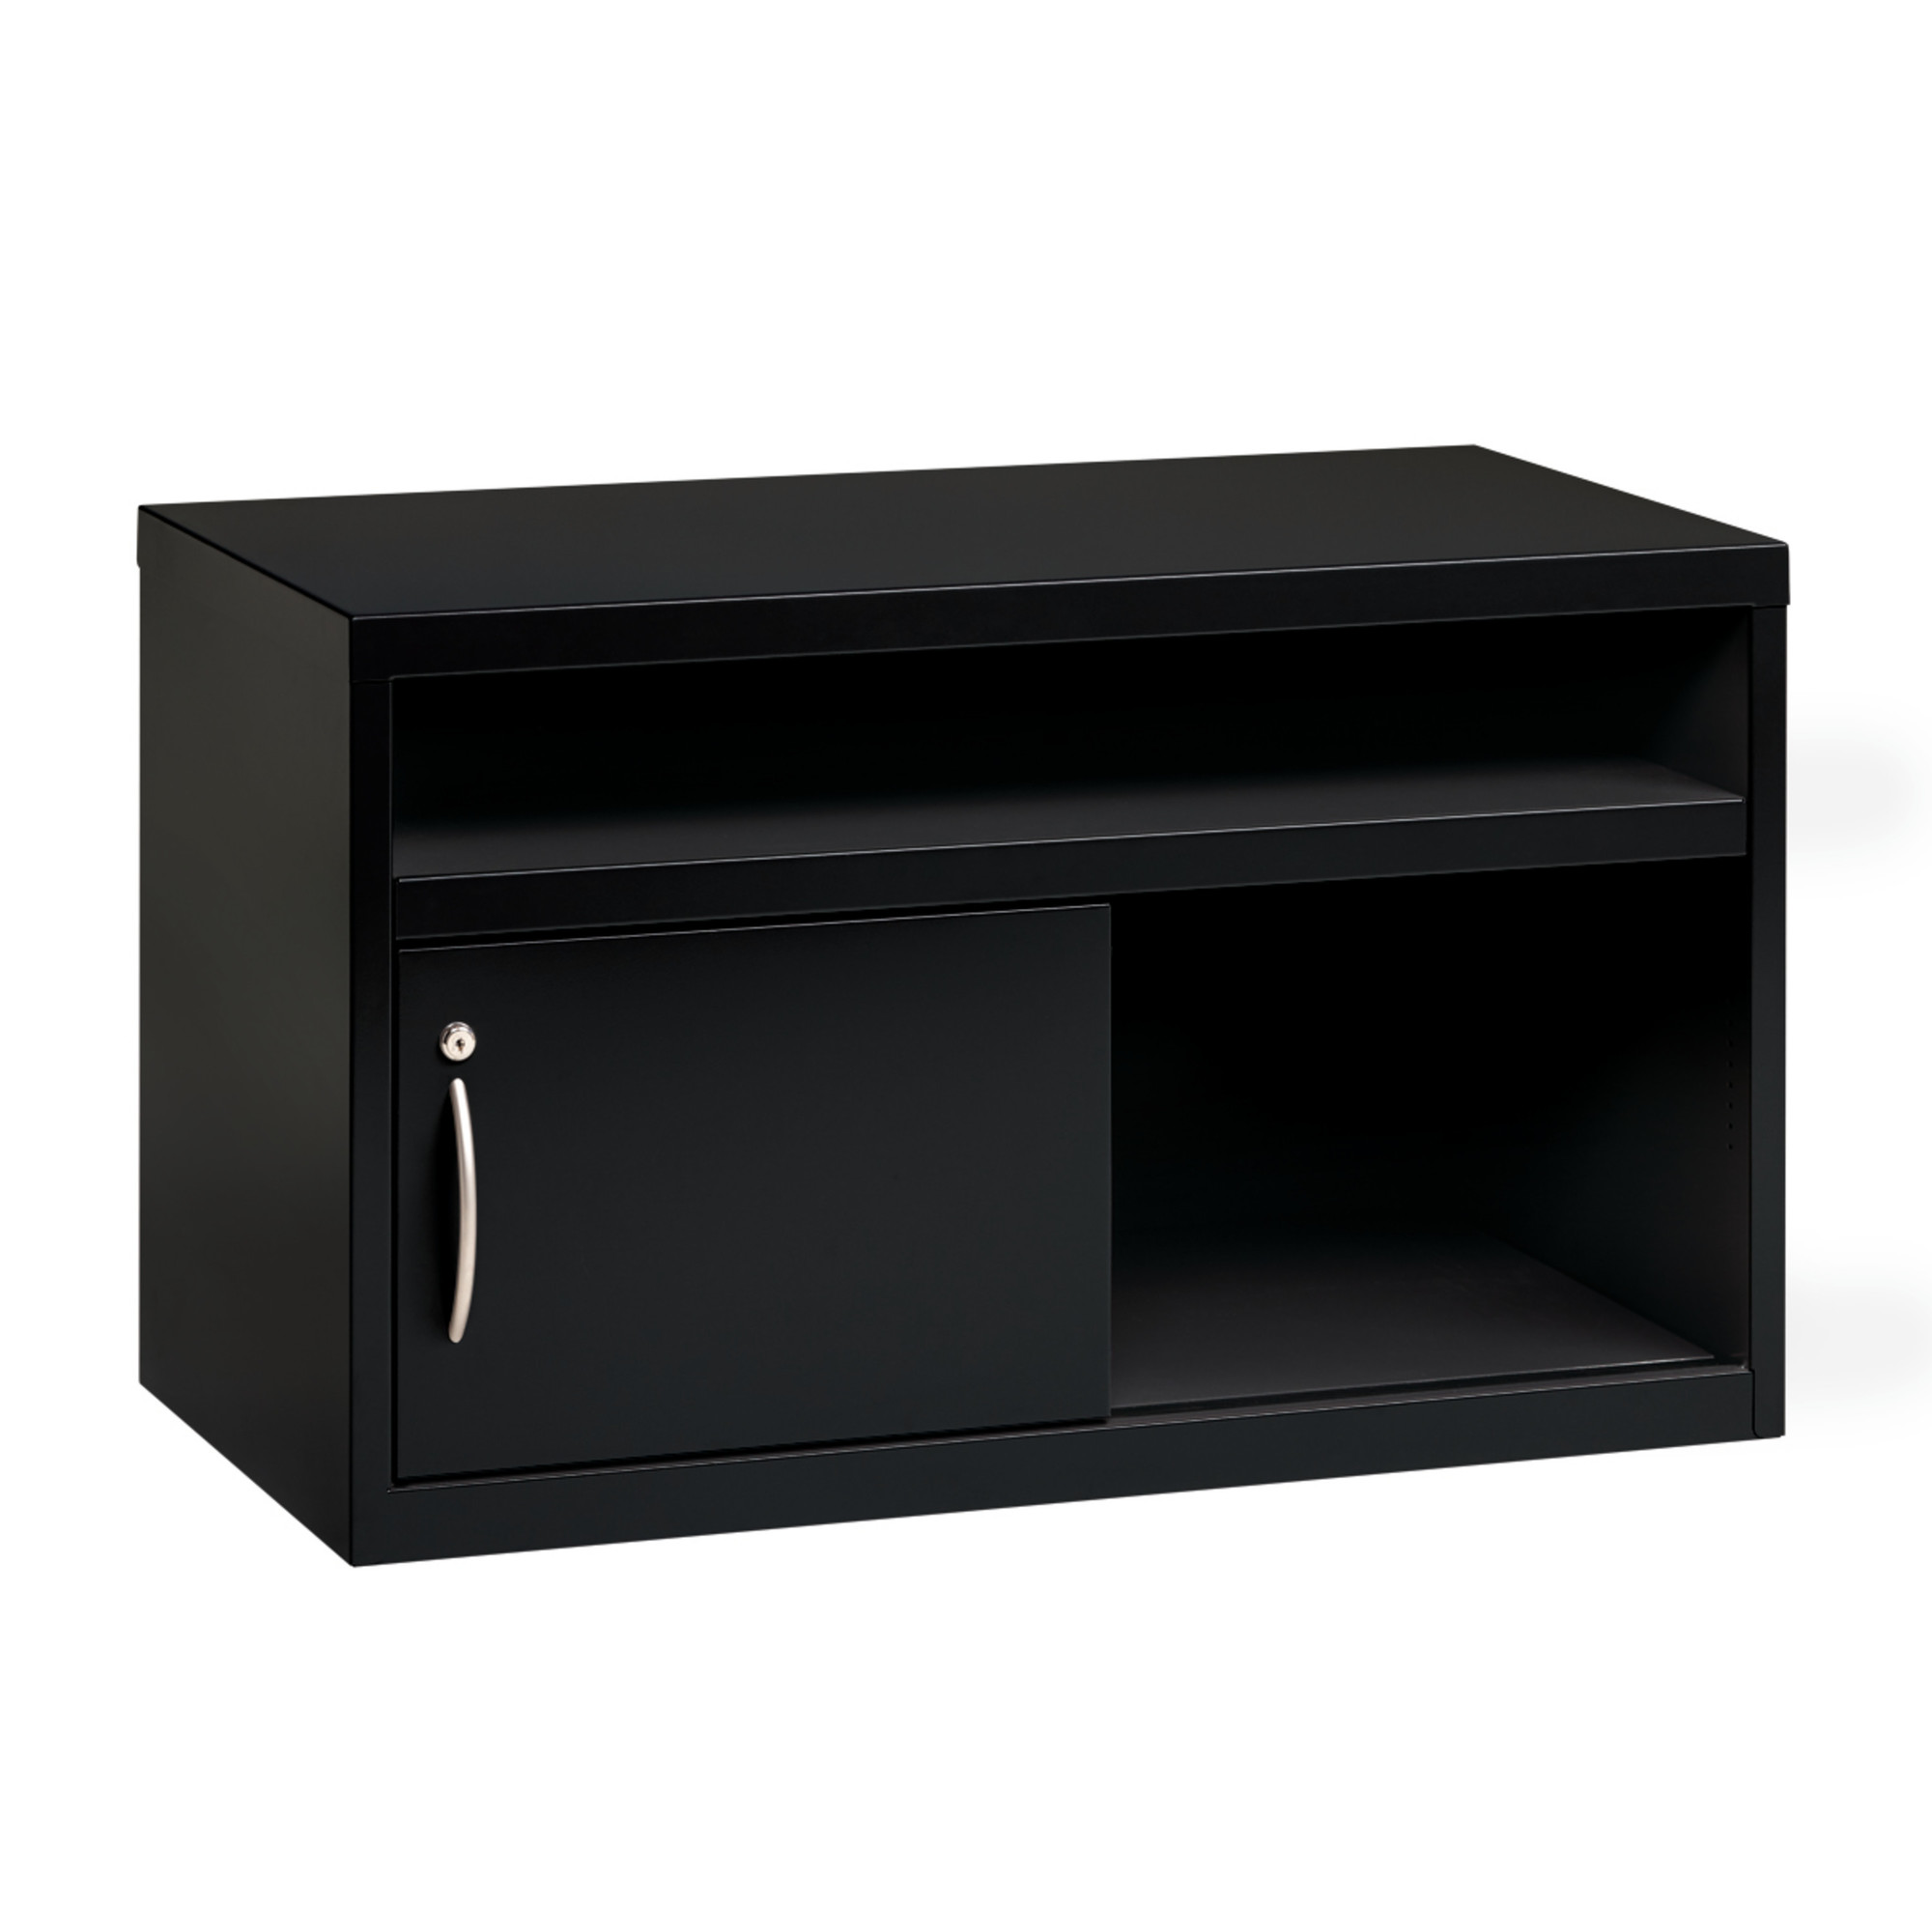 Credenza Lateral Cabinet with Sliding Door, Width 36 in, Depth 18.625 in, Height 22 in, Model - Hirsh Industries 20506